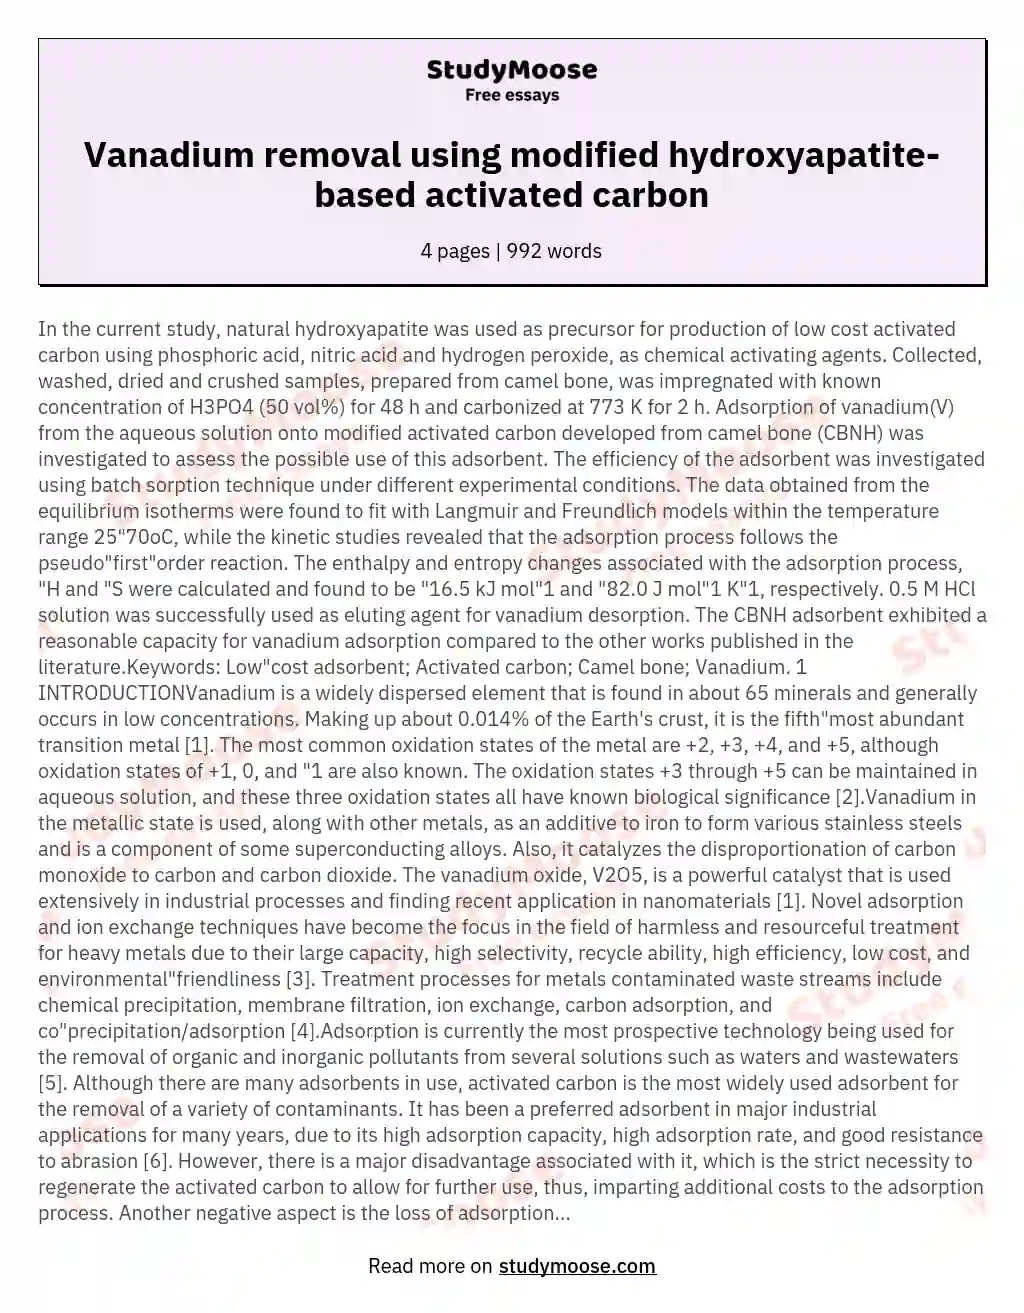 Vanadium(V) removal and recovery by adsorption onto modified activated carbon derived from natural hydroxyapatite